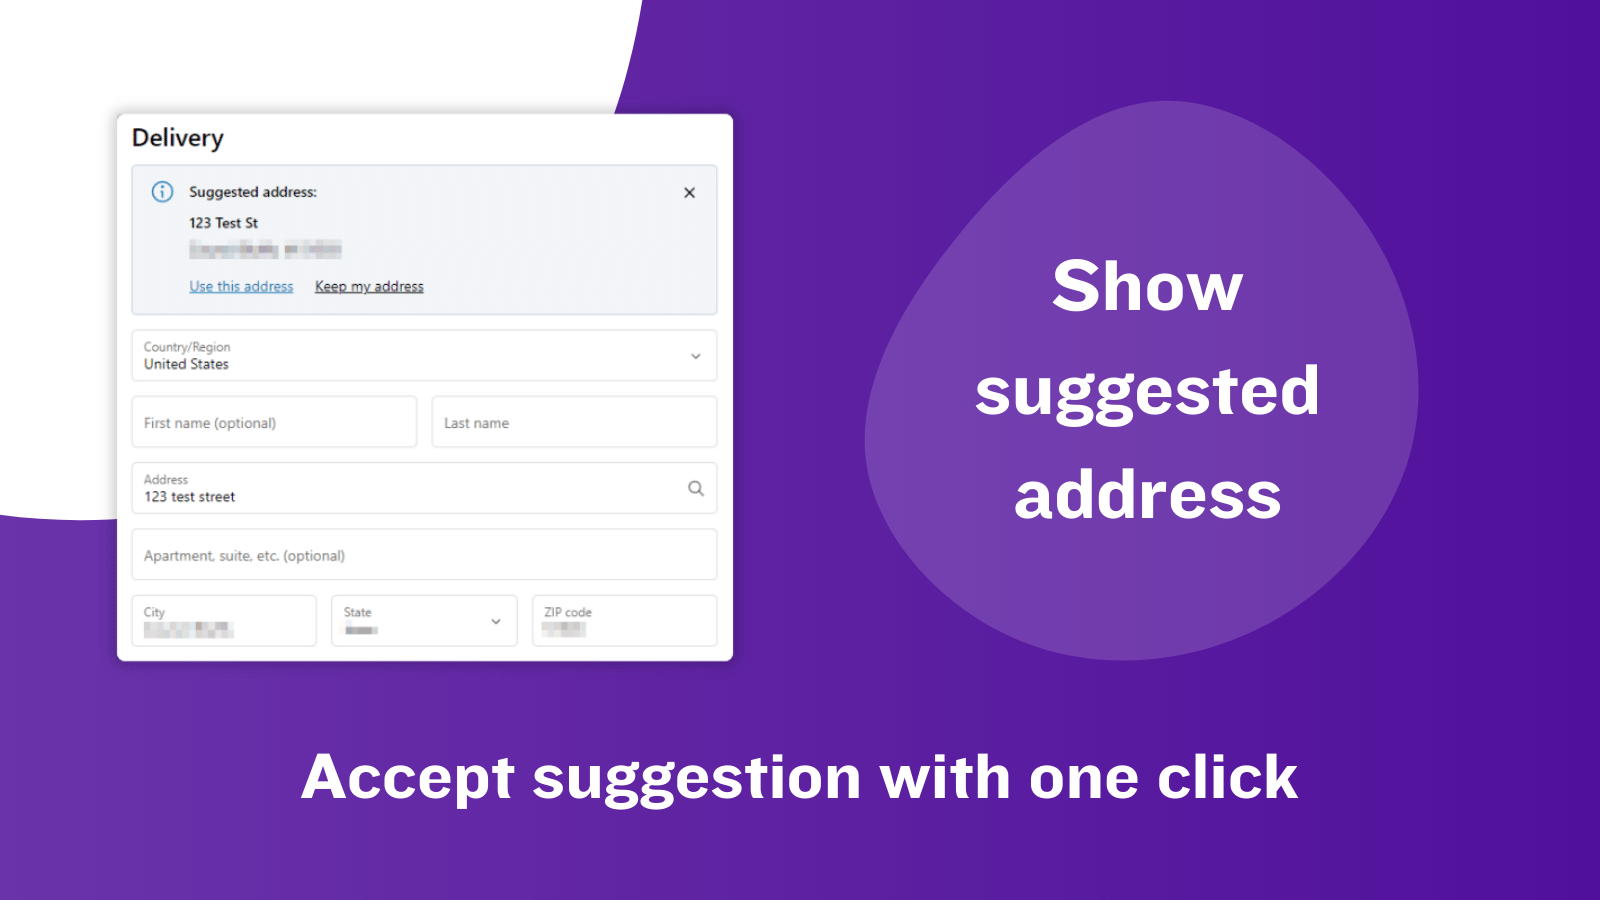 Show suggested address; Accept suggestion with one click